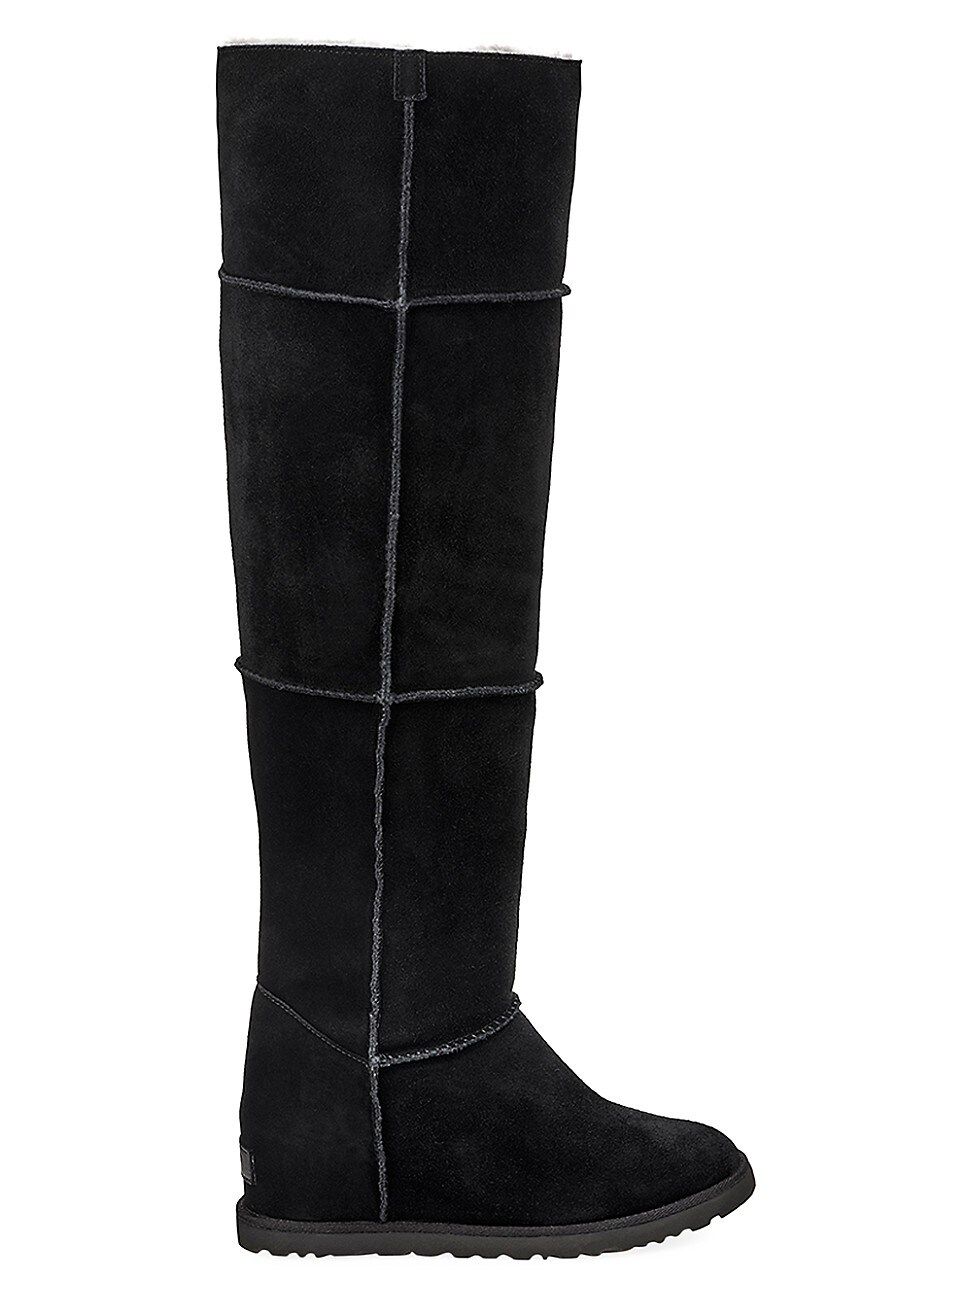 UGG Women's Classic Femme Over-The-Knee Sheepskin-Lined Suede Boots - Black - Size 9 | Saks Fifth Avenue